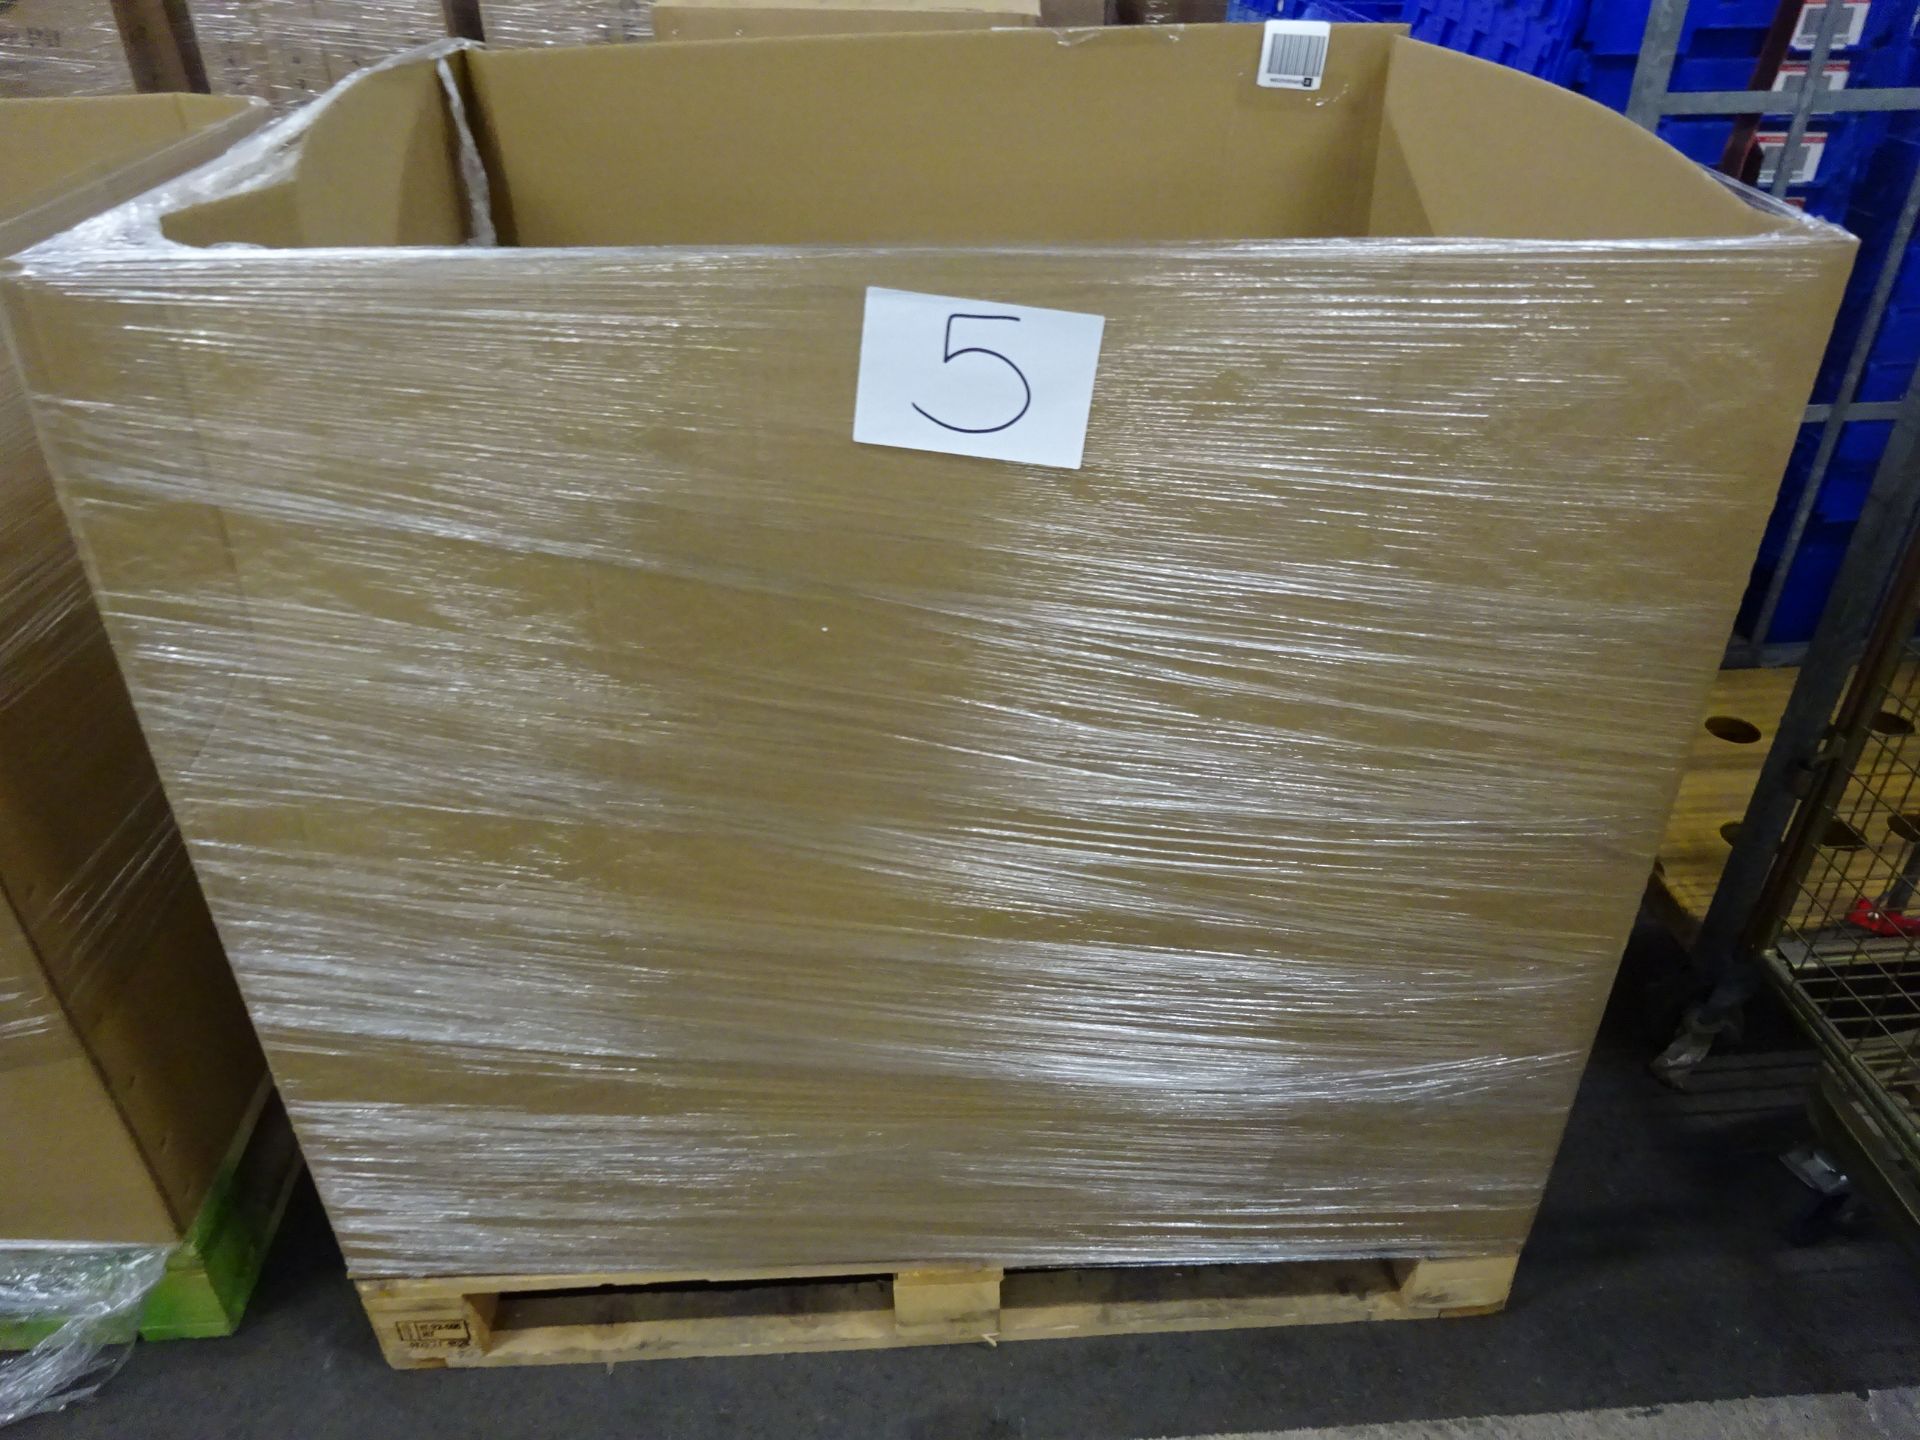 Pallet Of Arthouse Wallpaper From Next (Approx 200 Rolls Ranging From £9 to £20 per Roll)